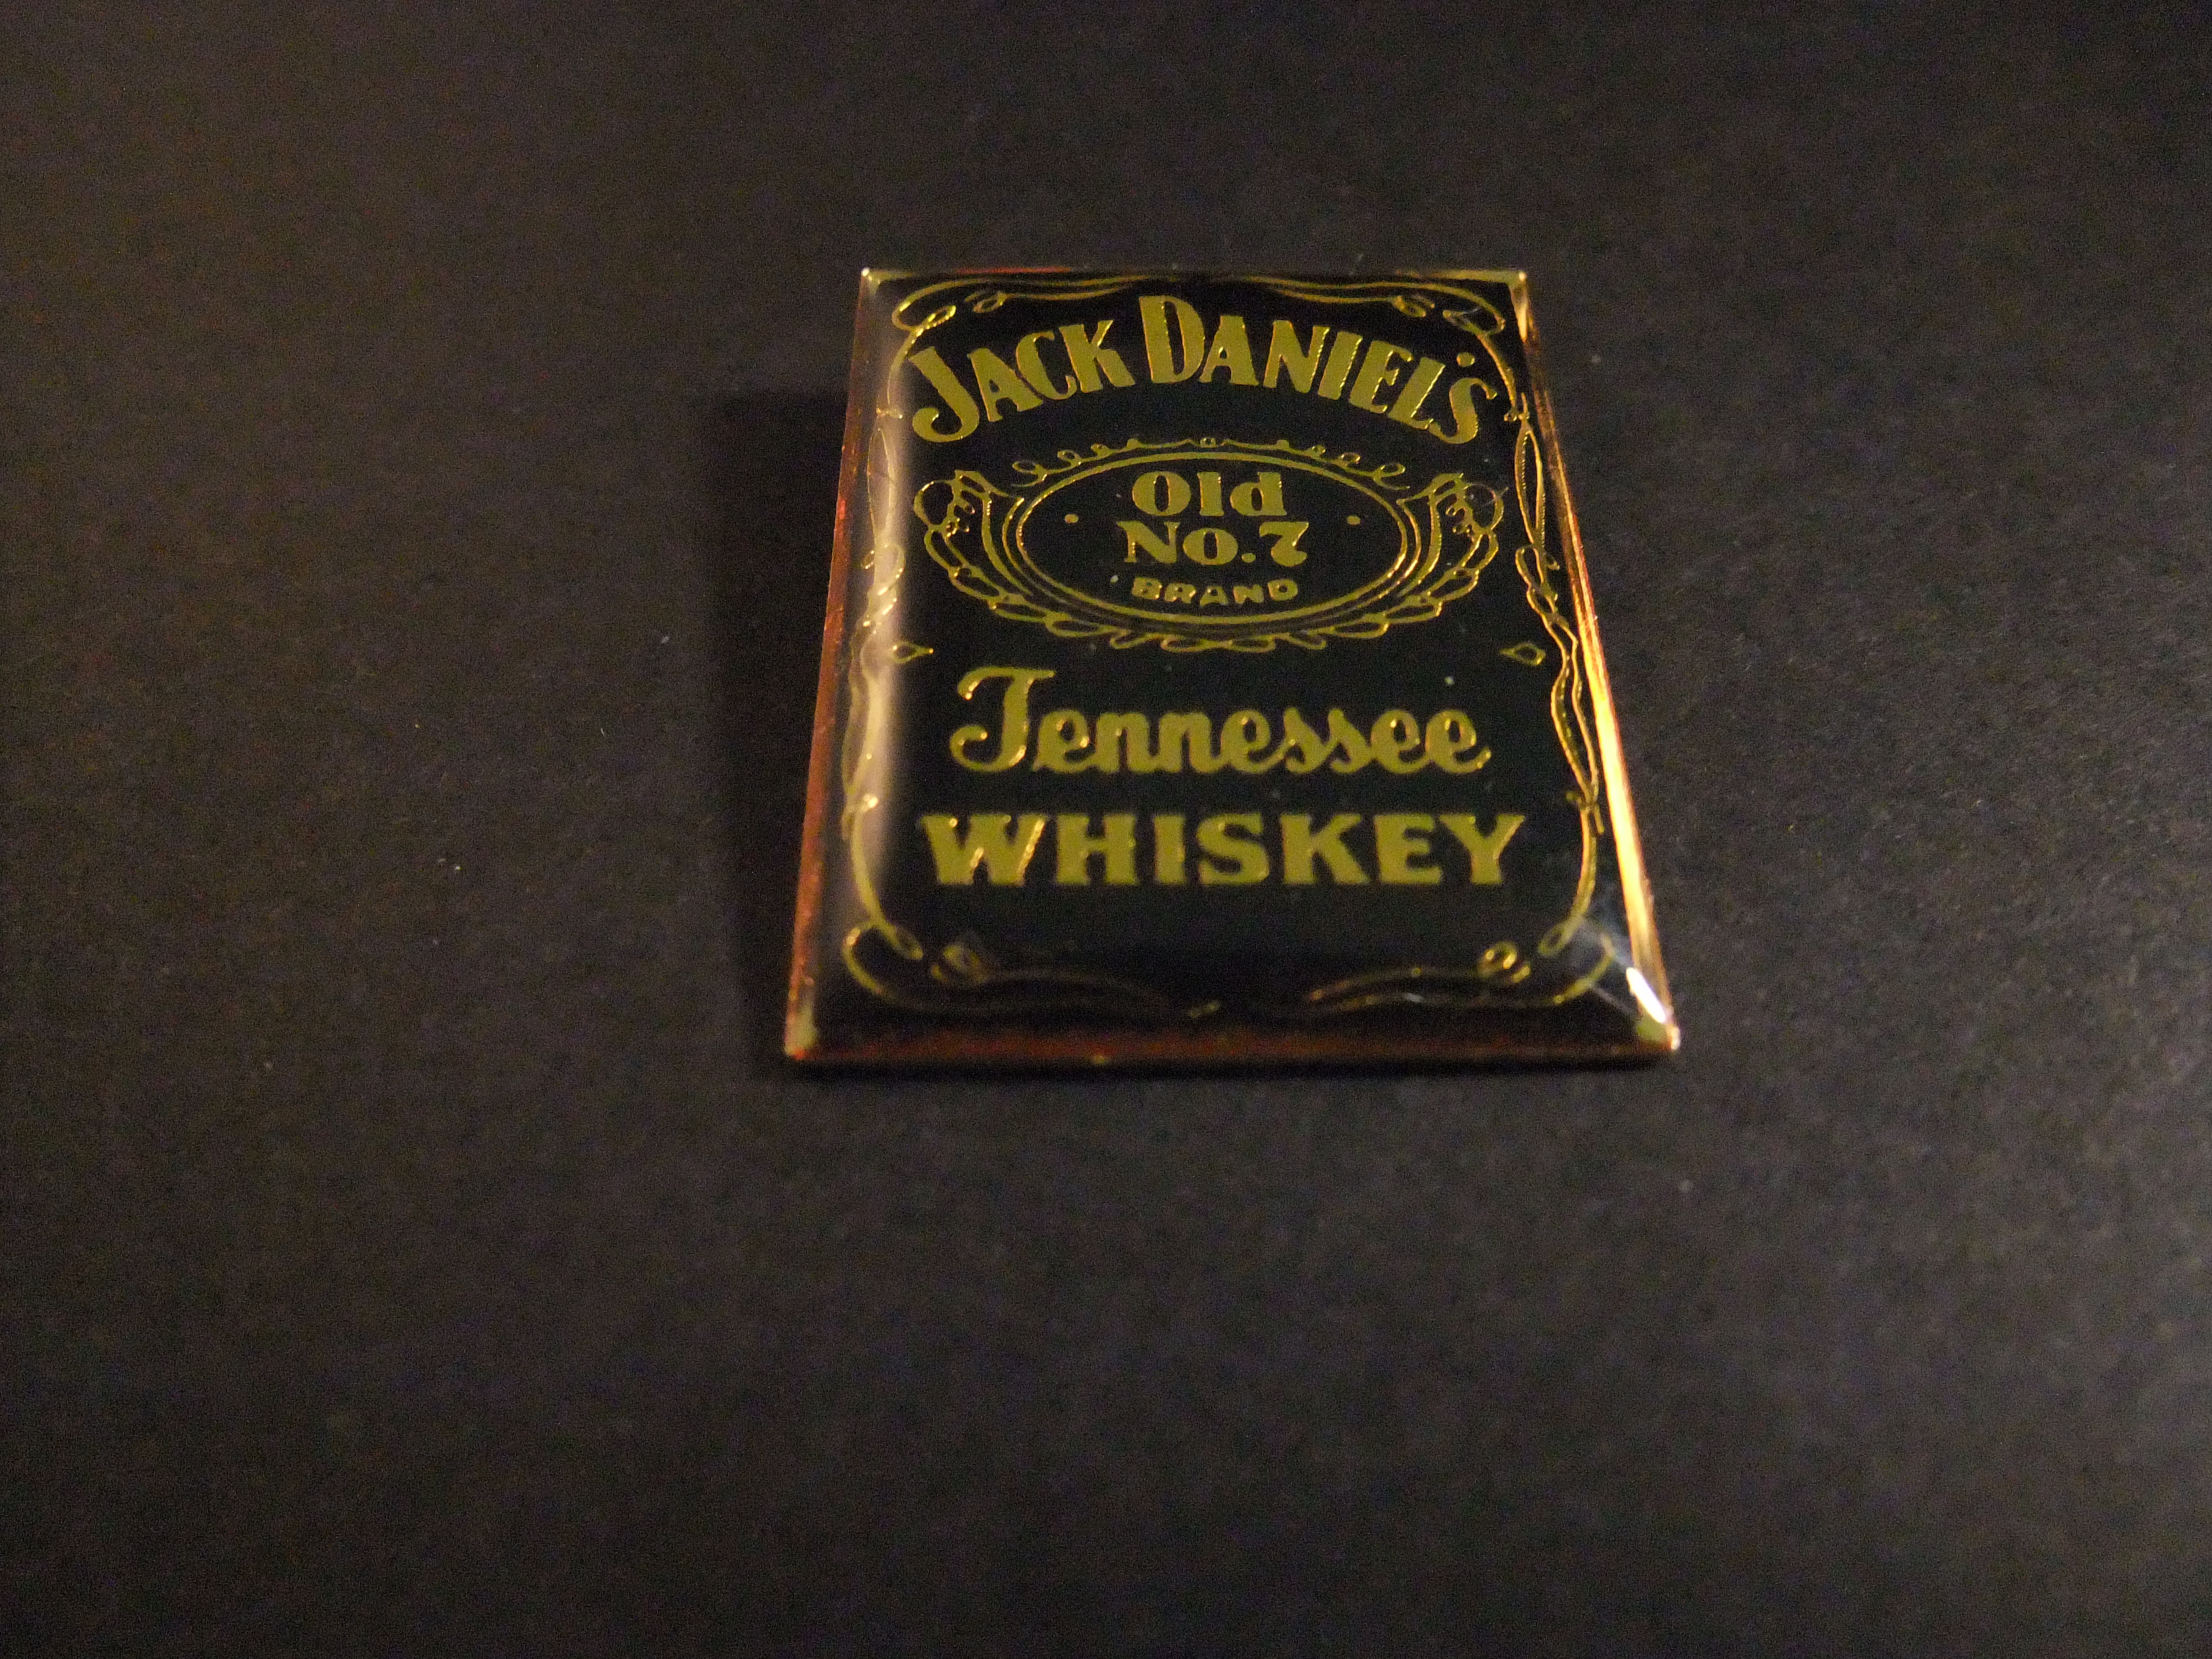 Jack Daniels old No. 7 brand Tennessee Whiskey